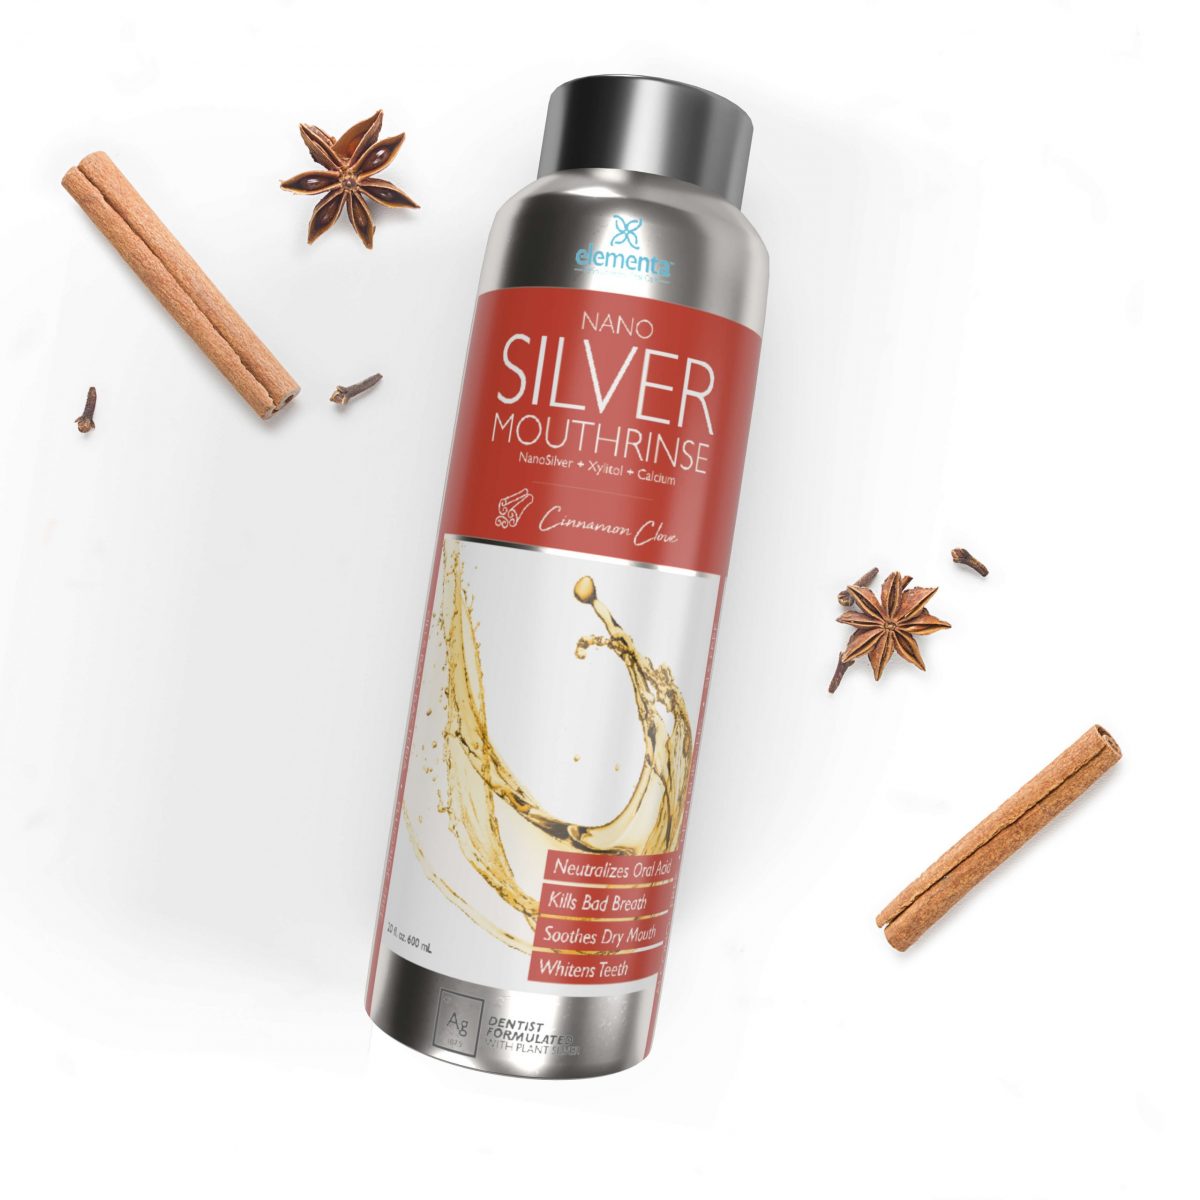 Elementa Silver mouth rinse in cinnamon clove flavor with cinnamon sticks in the background